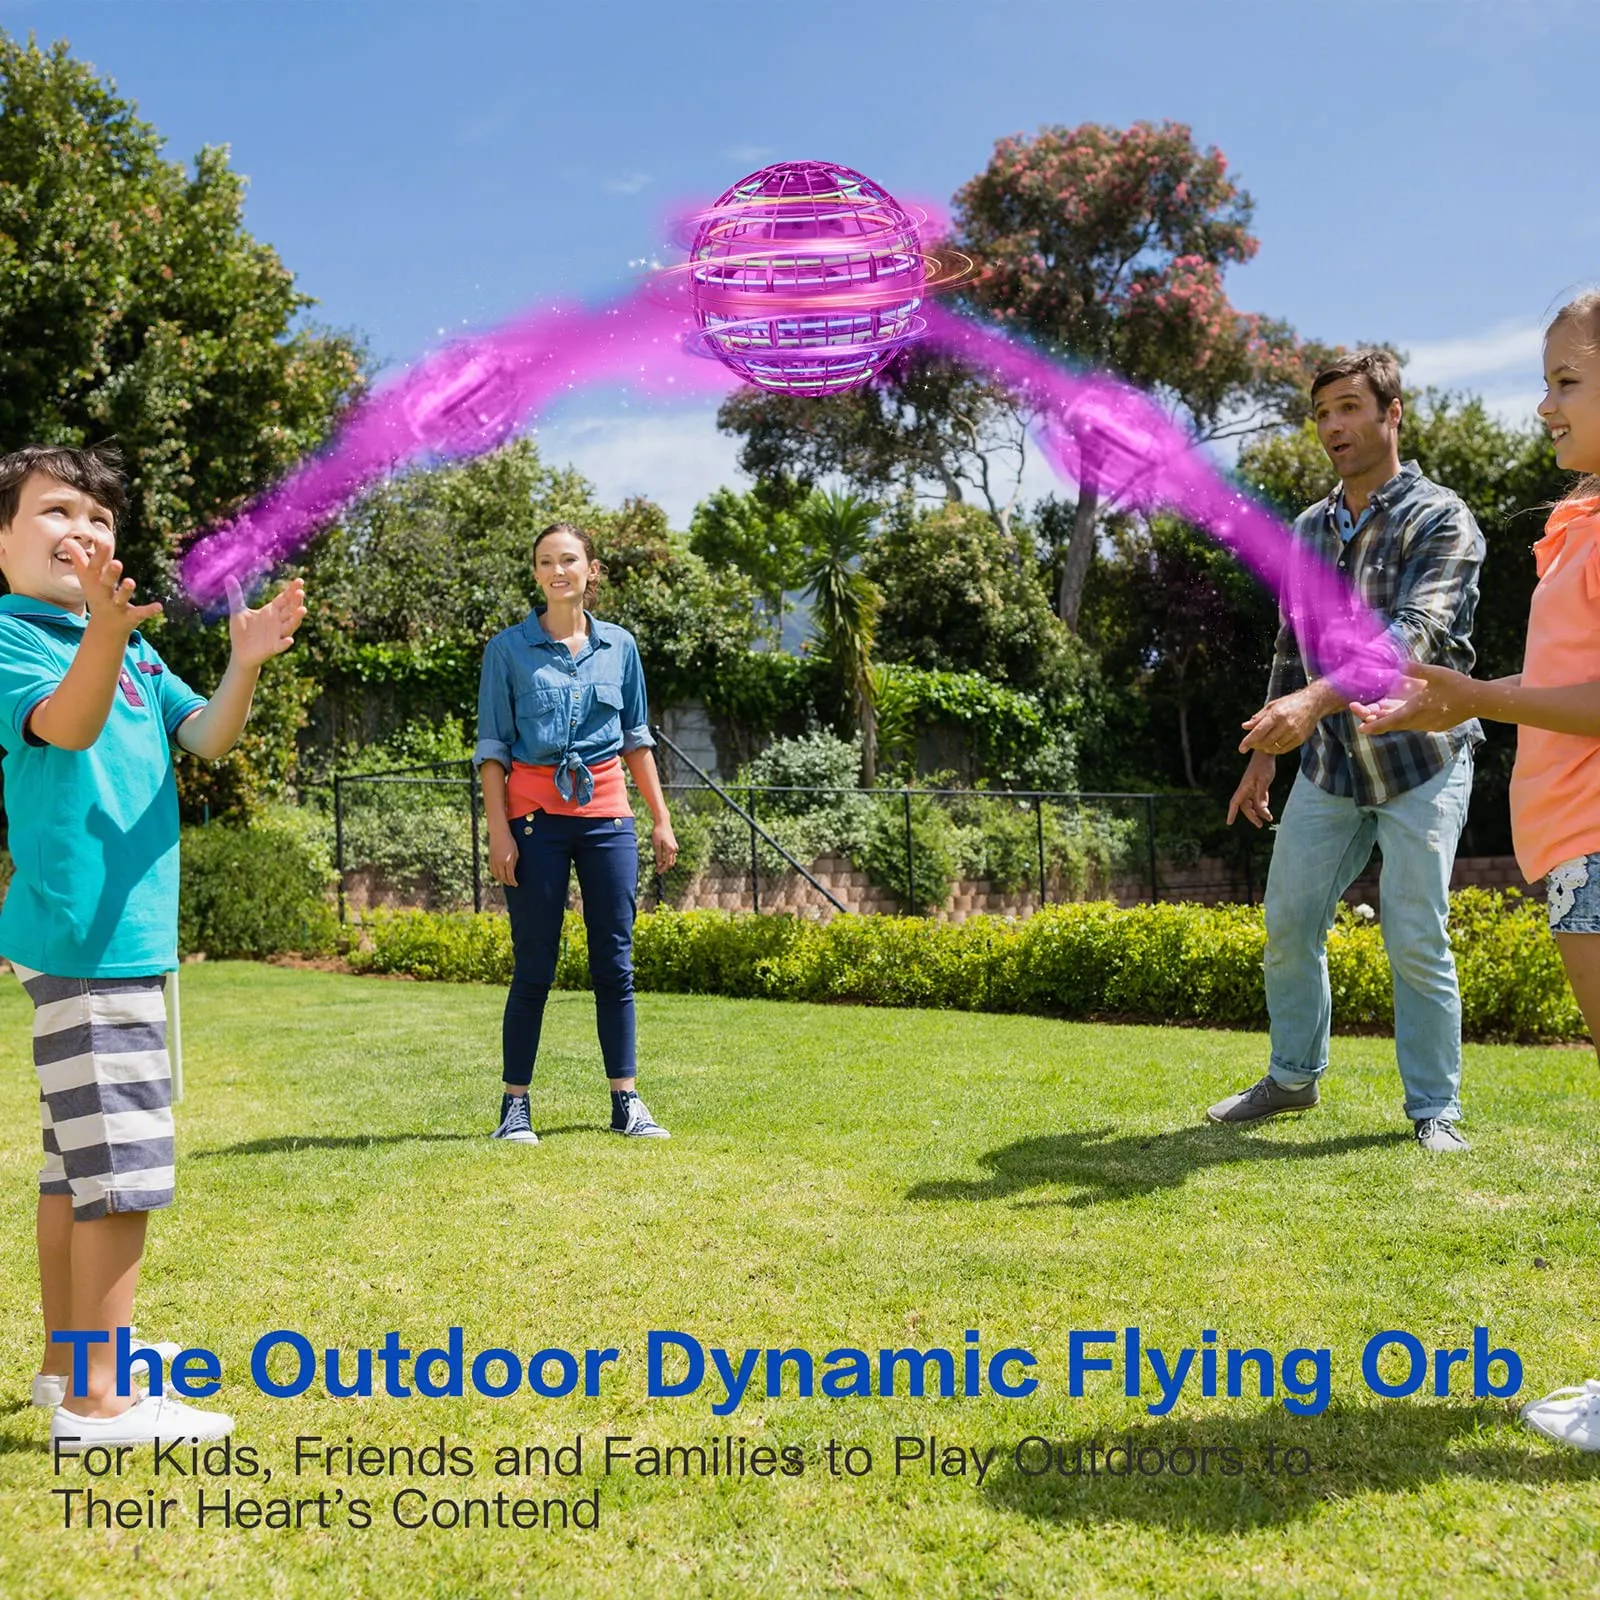 flying orb toys 2022 upgraded nebula orb toy intelligent magic boomerang ball flying spinner cool hover ball soaring drone space fly orb floating hoverball outdoor for kids adults boys girls pink